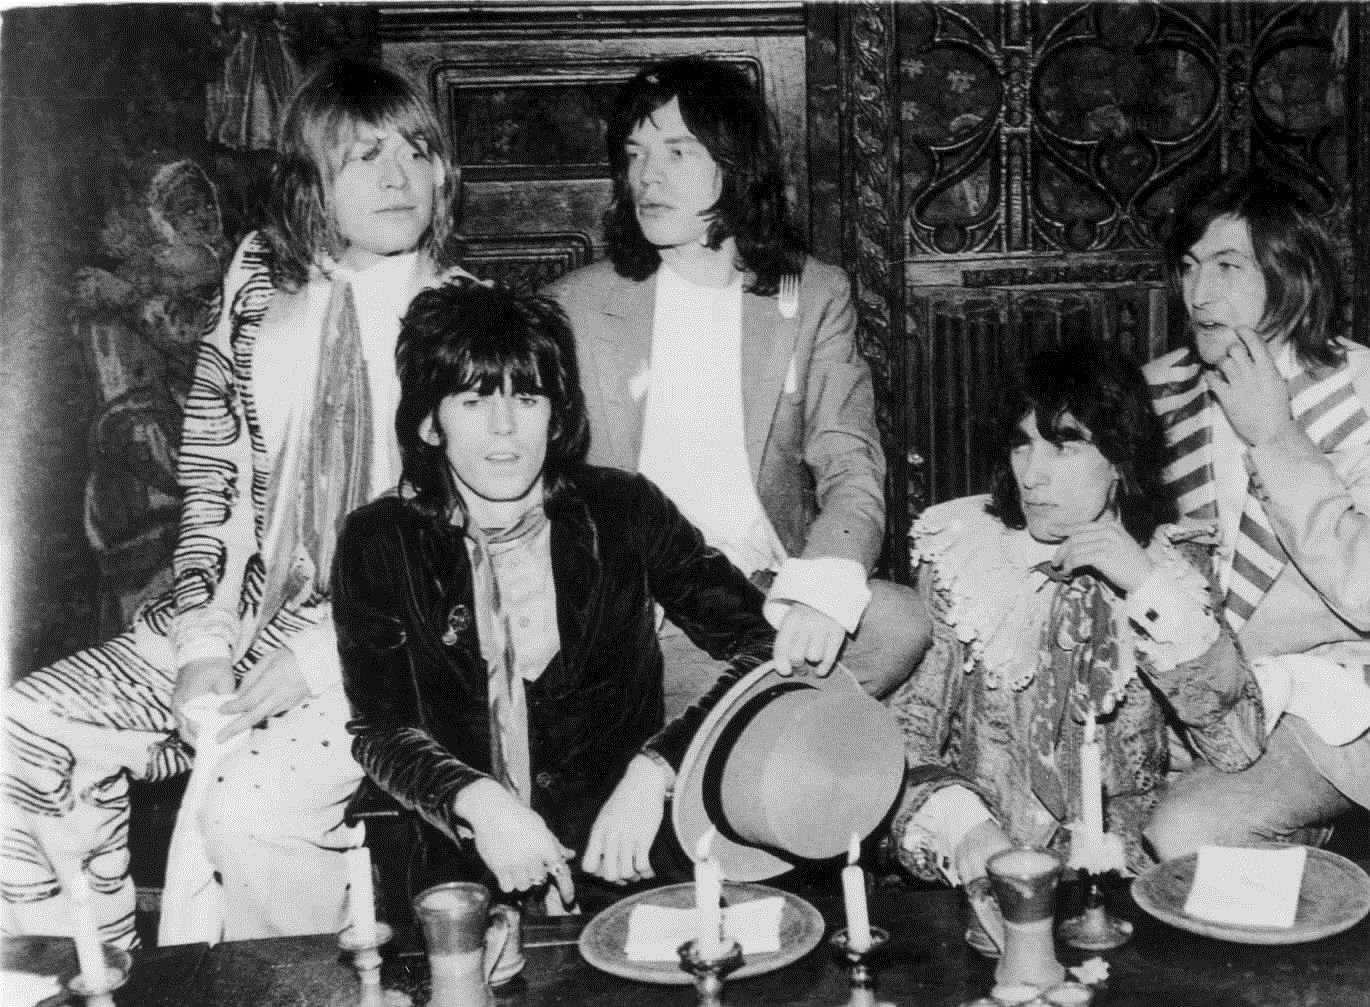 The Rolling Stones, (left to right) Brian Jones, Keith Richards, Mick Jagger, Bill Wyman and Charlie Watts